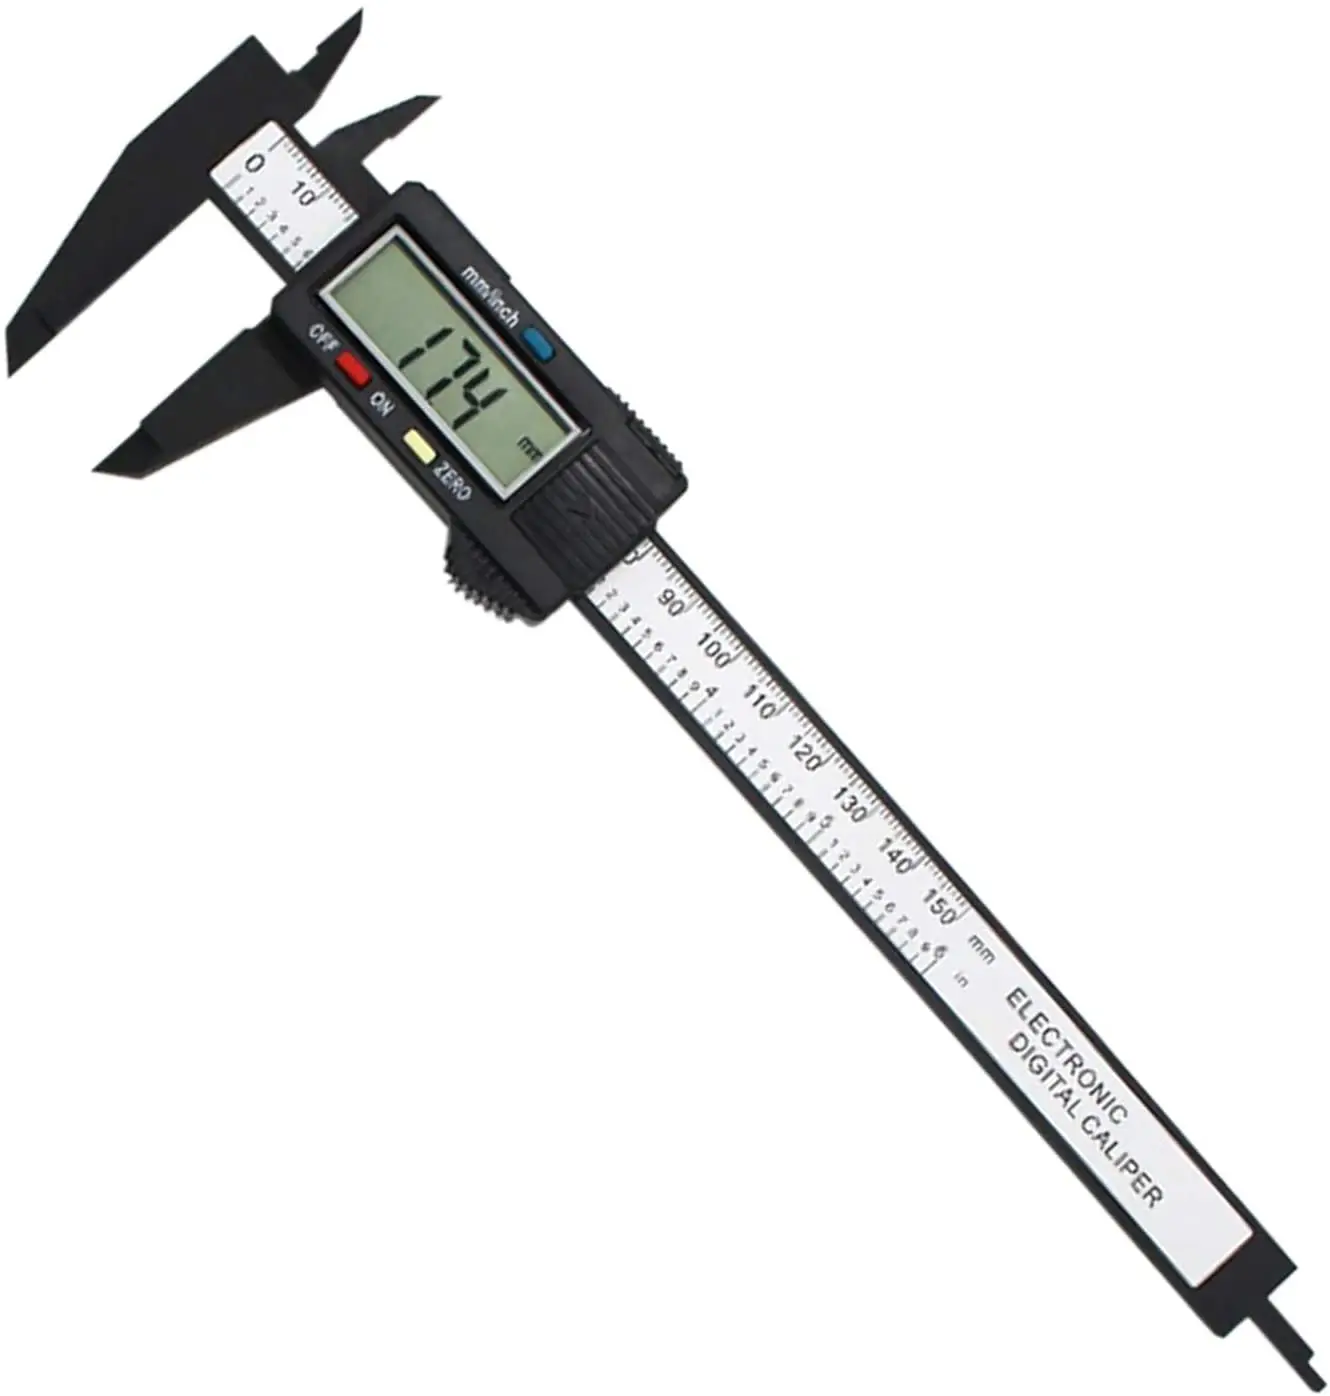 Digital Calipers Plastic With Large LCD Screen 6 Inch Millimeter Conversion 